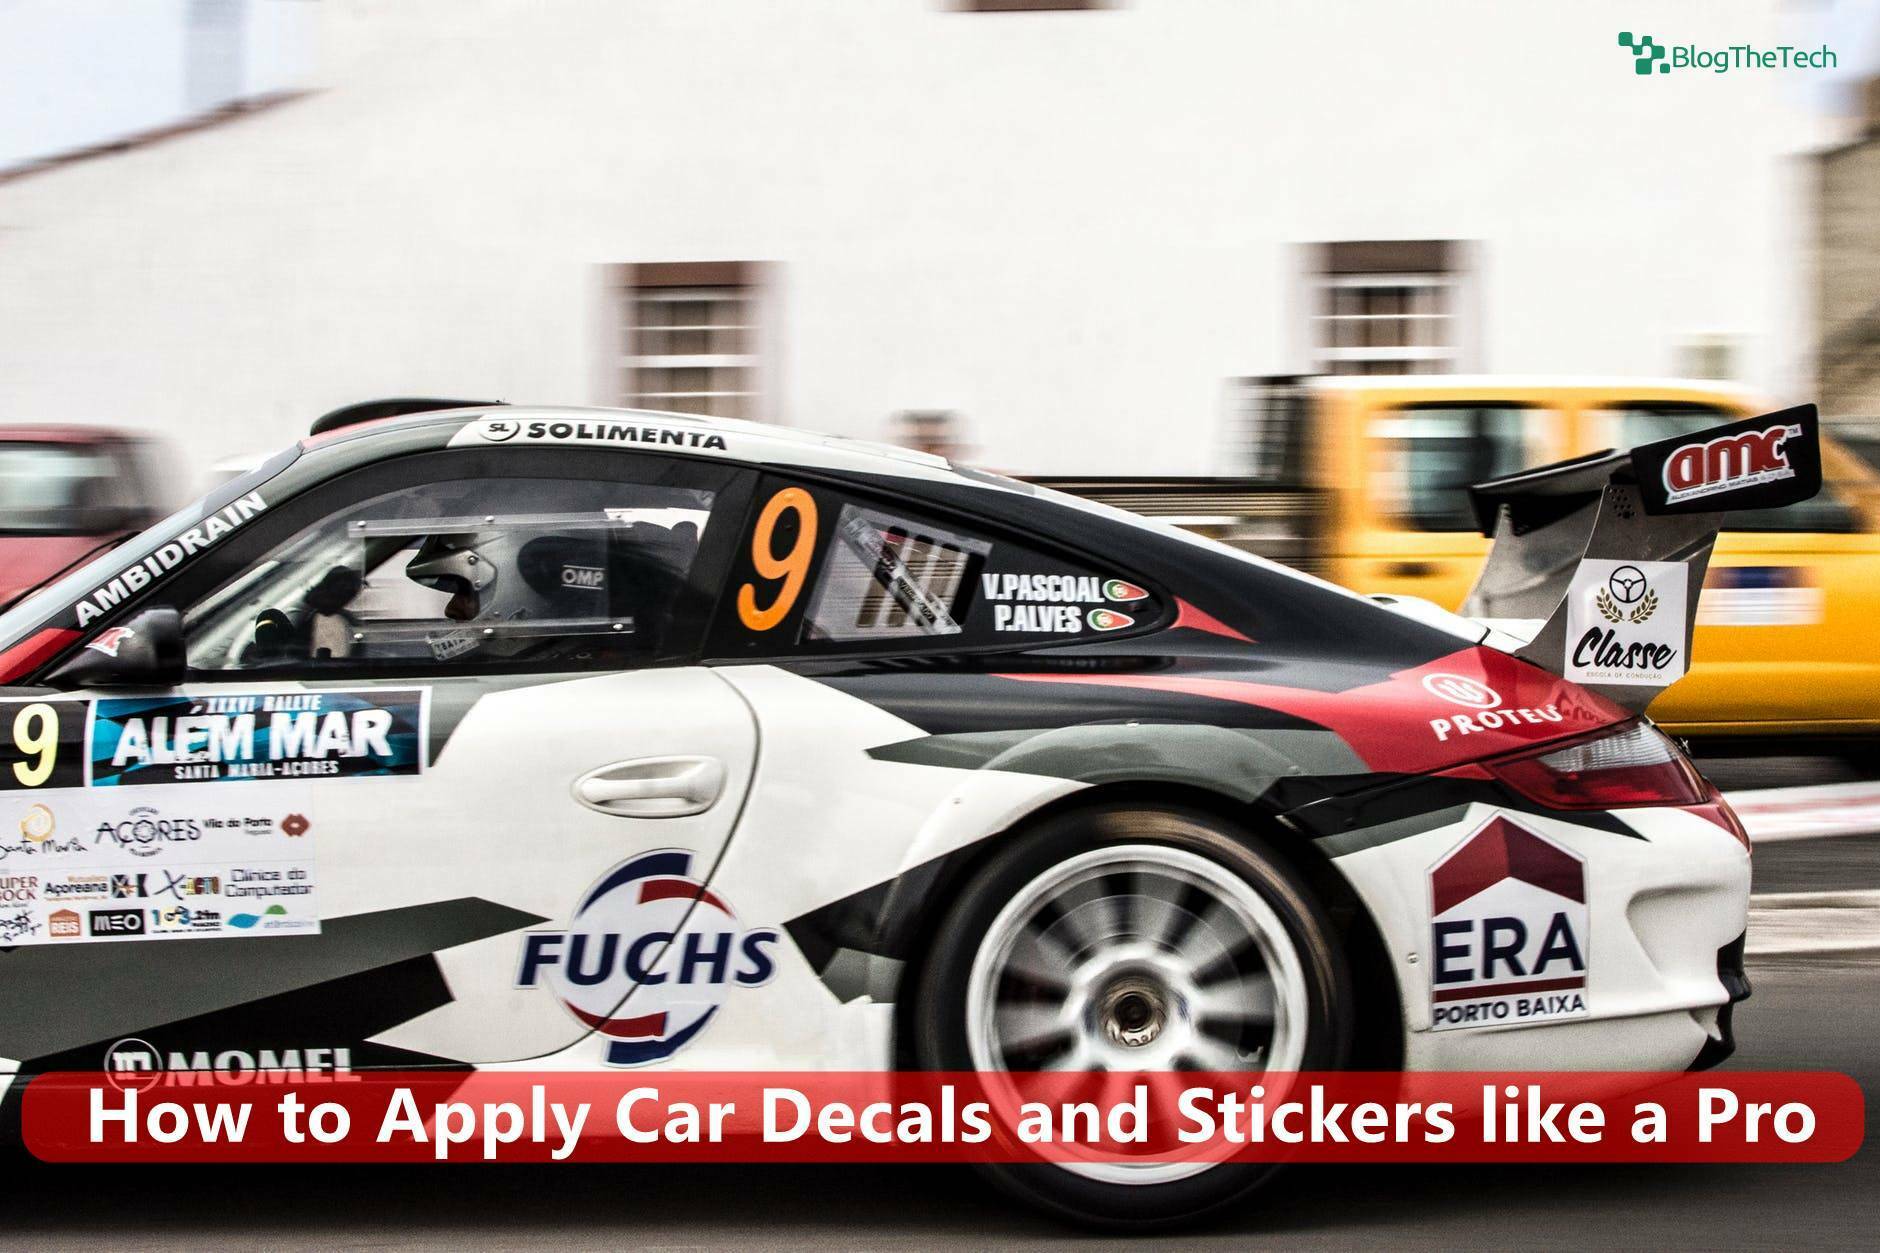 How to Apply Car Decals and Stickers like a Pro